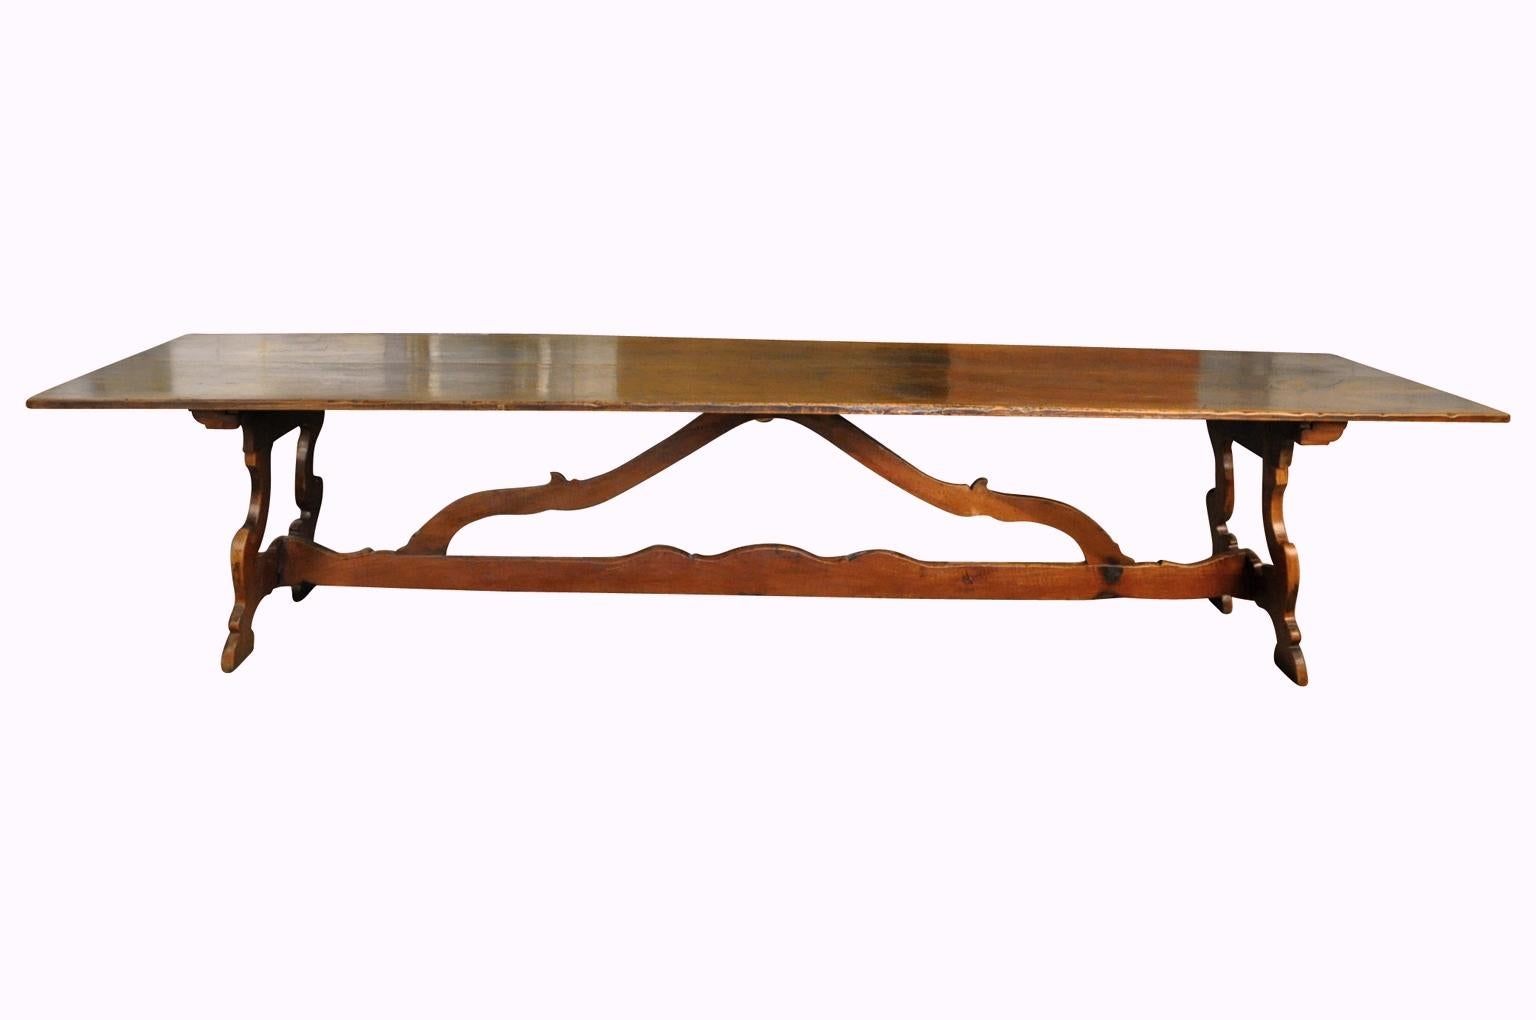 An exceptional and grand scale 18th century Northern Italian trestle table - dining table. Superbly constructed from stunning walnut with classical lyre legs and wonderfully sculpted stretchers. Sensational patina and graining. A truly exquisite